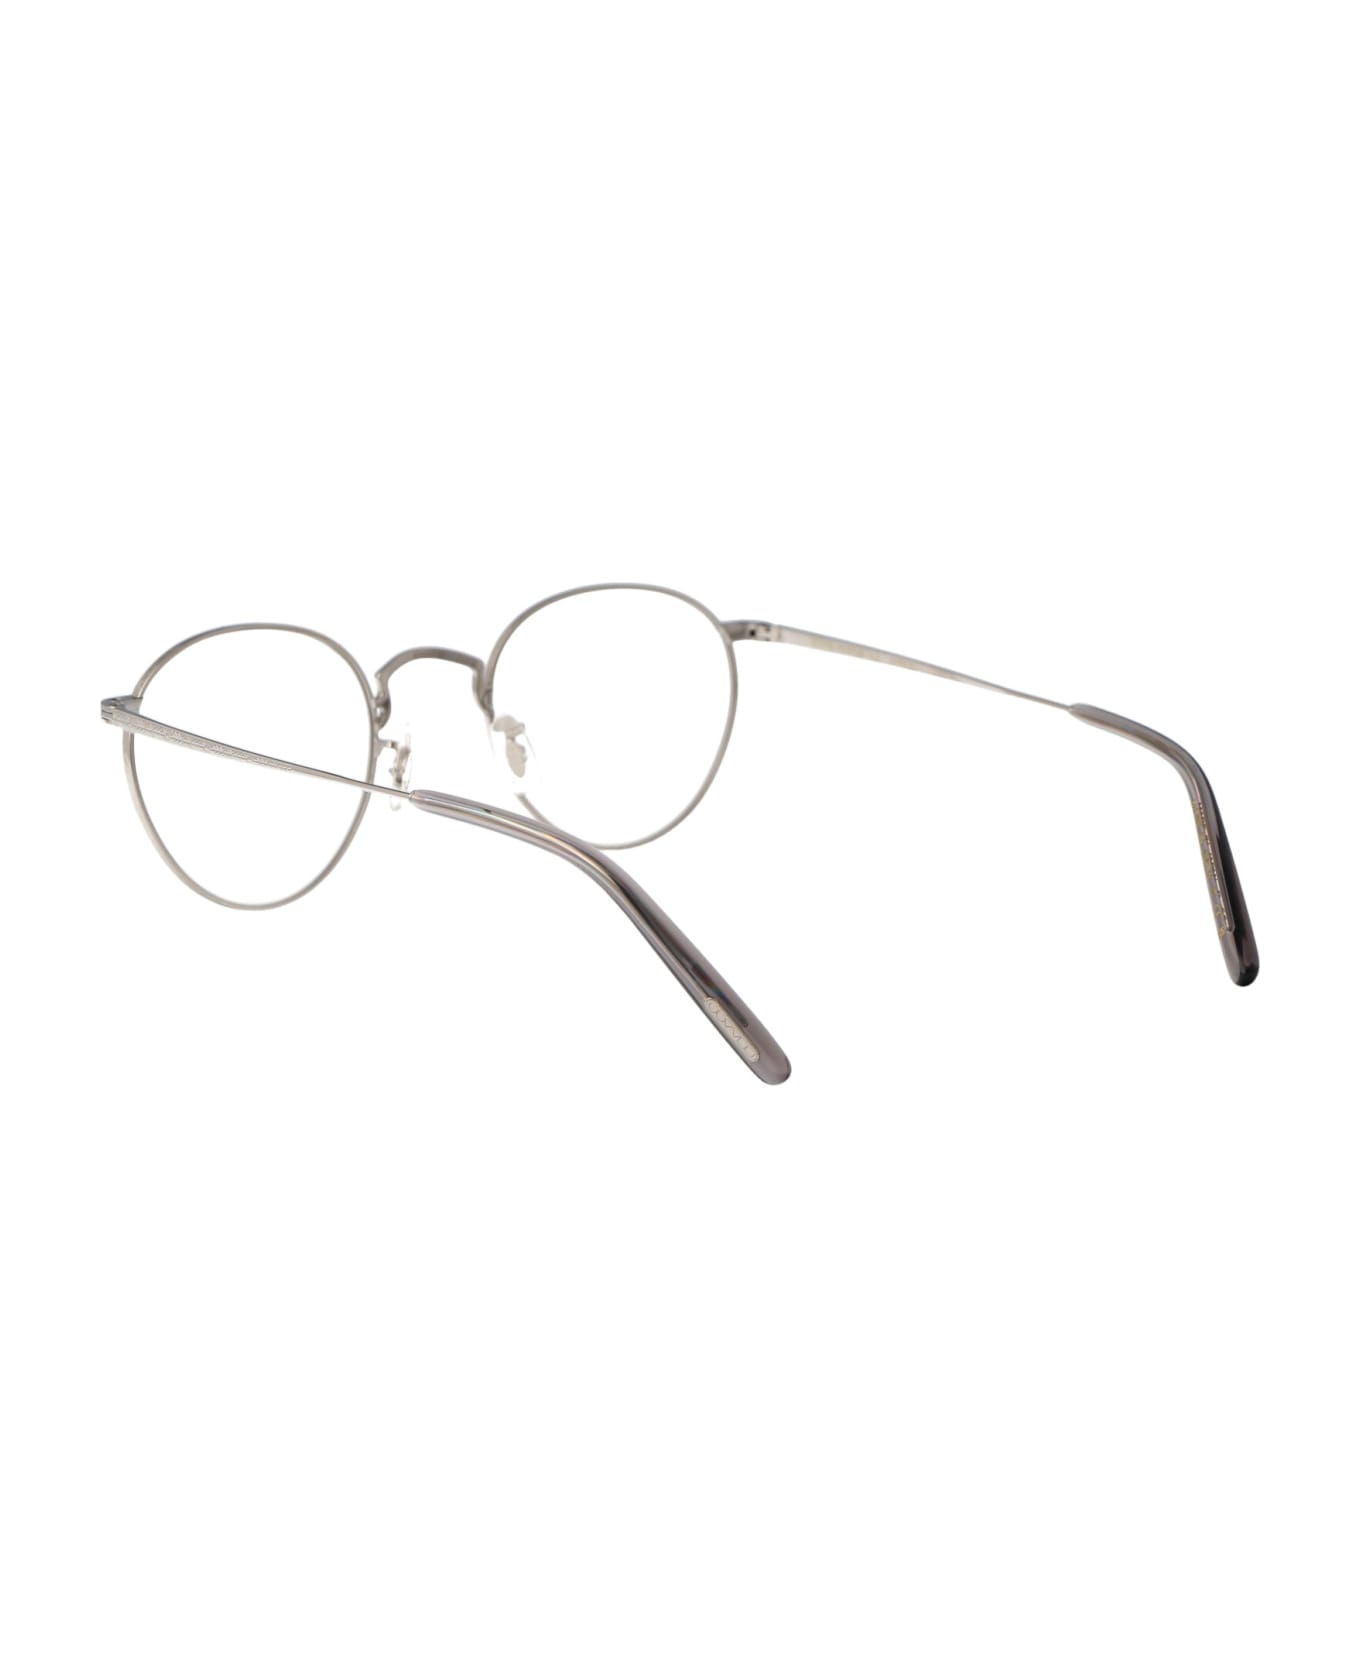 Oliver Peoples Op-47 Glasses - 5036 Silver アイウェア